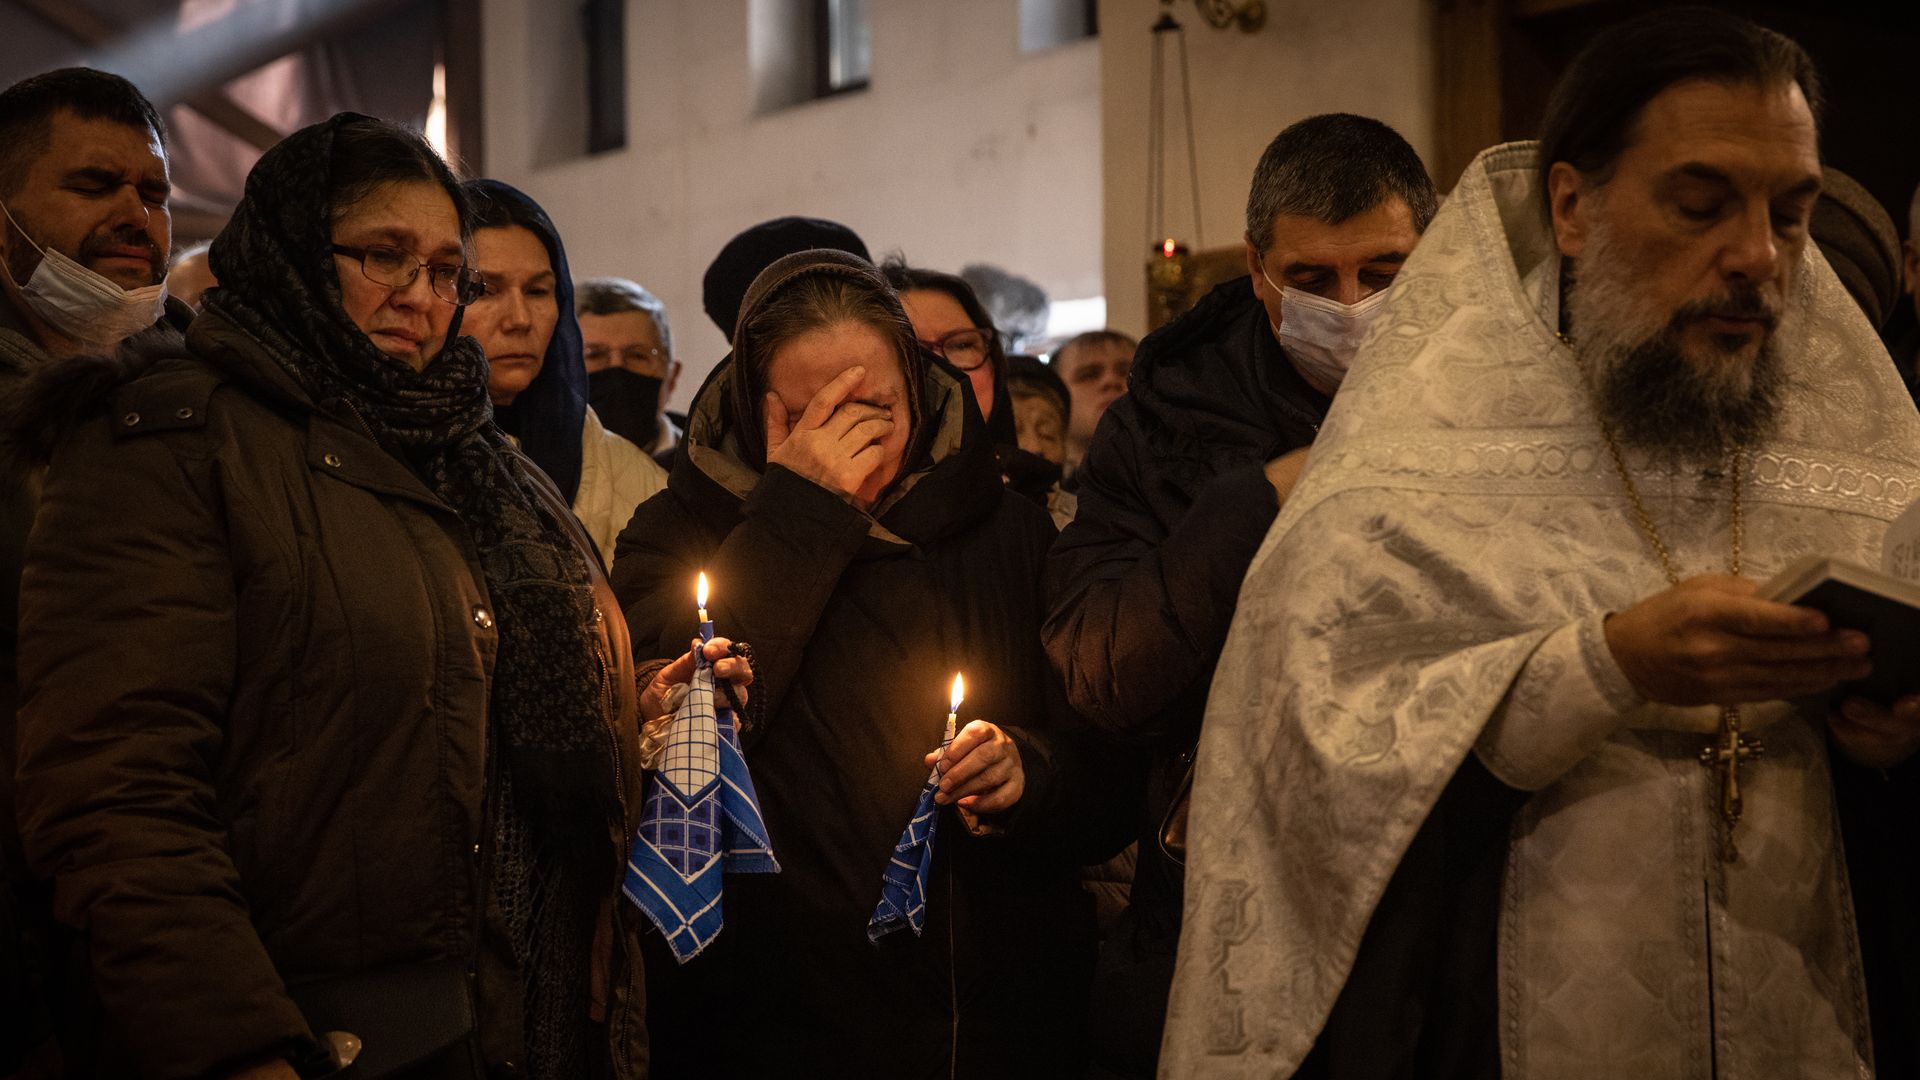 Mourners are seen during the funeral Tuesday for a Ukrainian soldier killed in recent fighting.